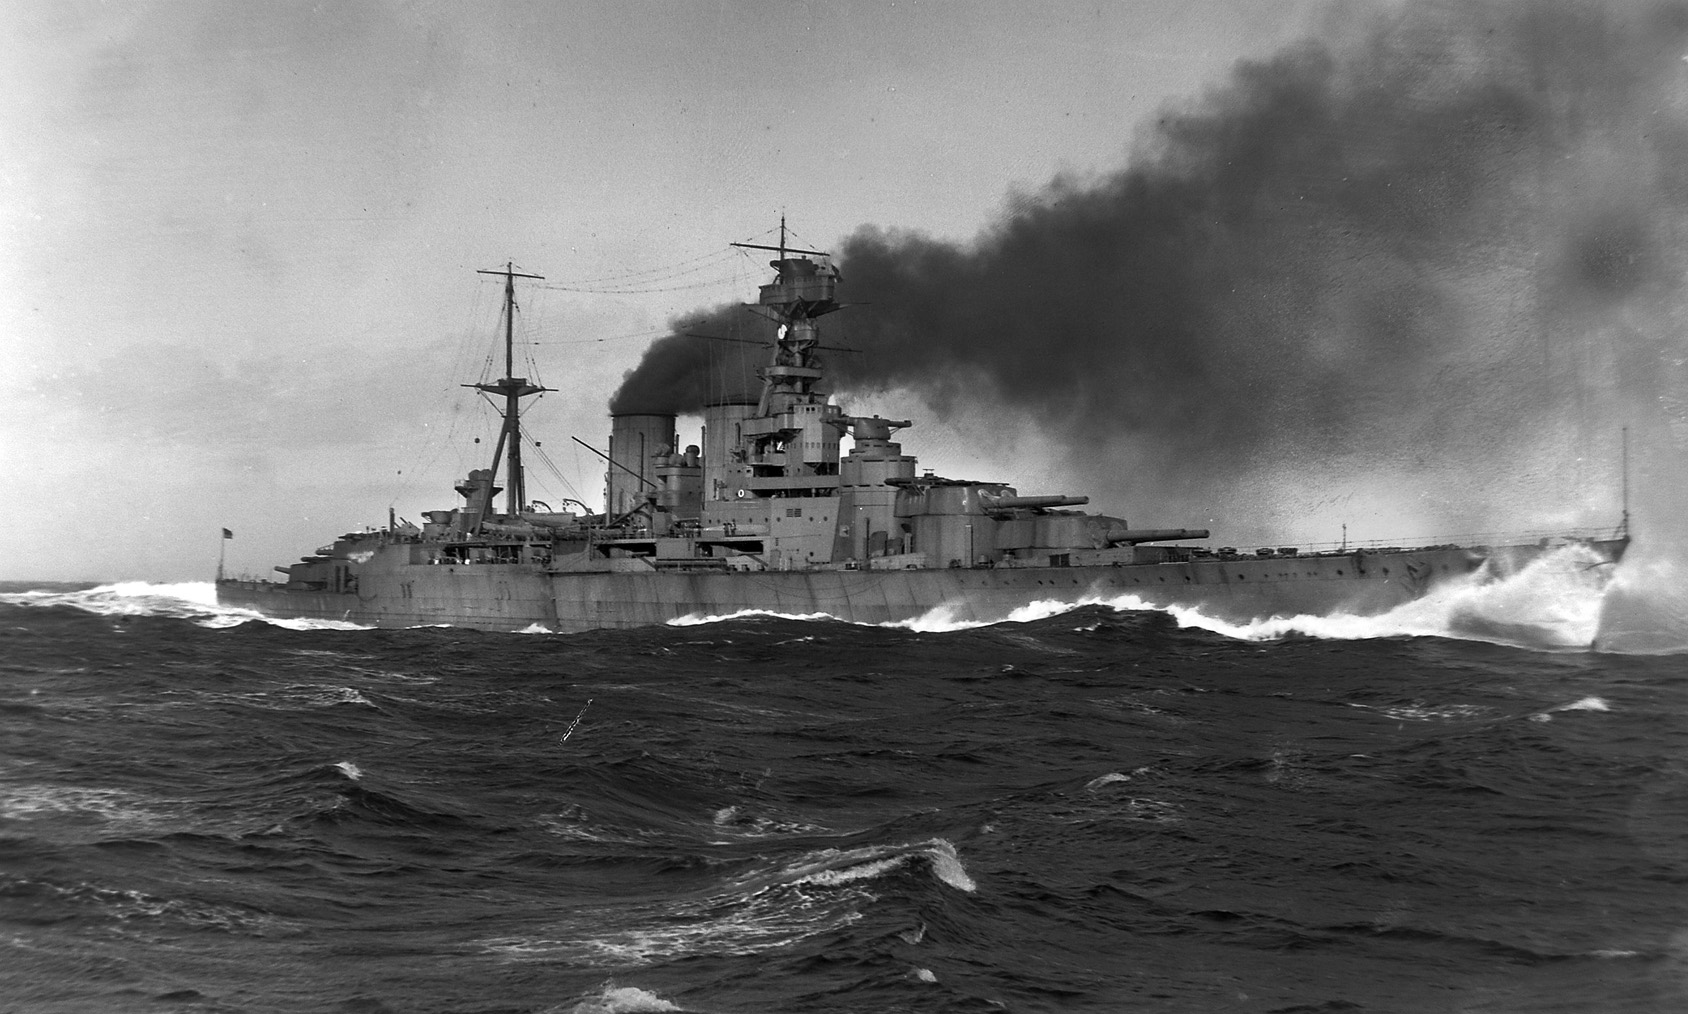 The battlecruiser HMS Hood, launched in 1918. She was sunk under still-unexplained circumstances with substantial loss of life.